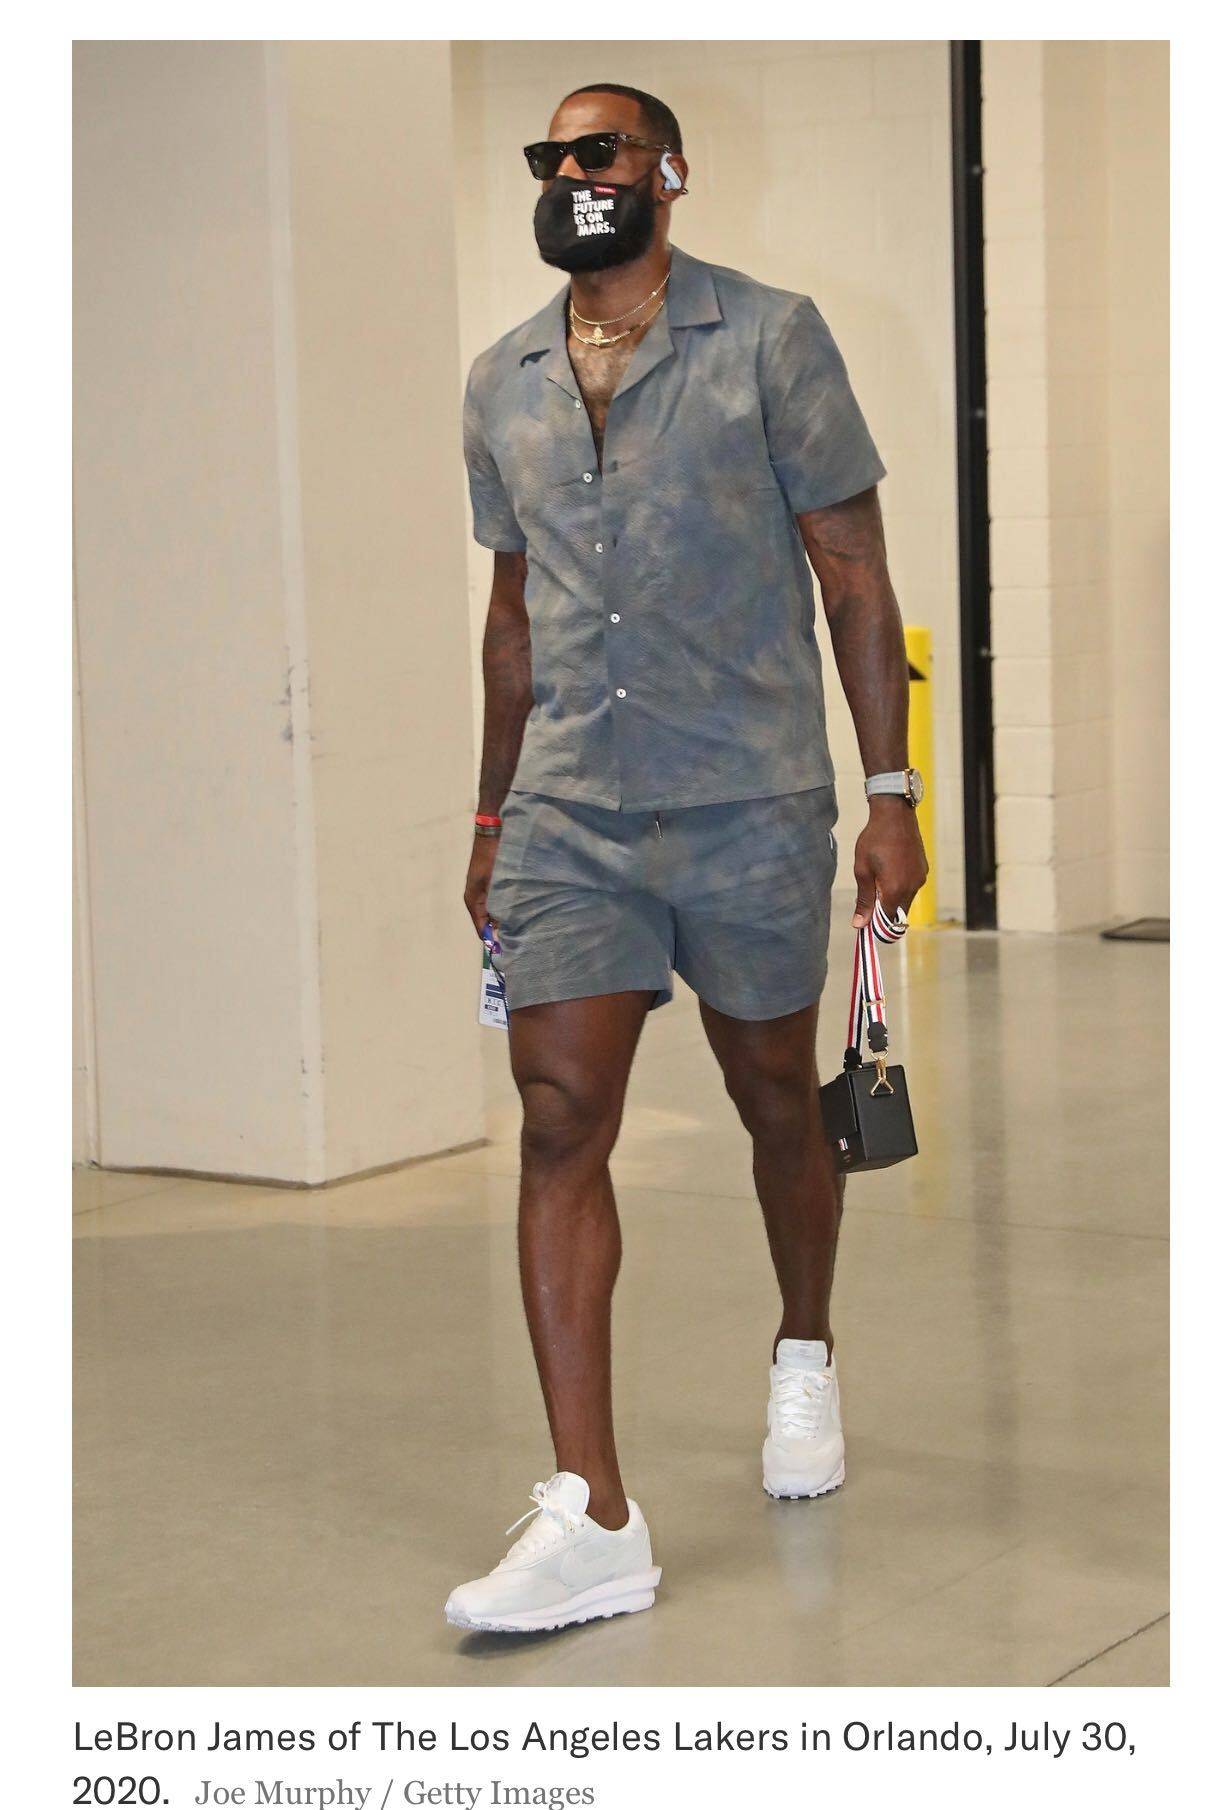 Russell Wilson  - Russell - Image 26 from Everyone Has Thoughts On Lebron  James' Shorts Set And Black Leather Purse Worn Before Game In The Bubble